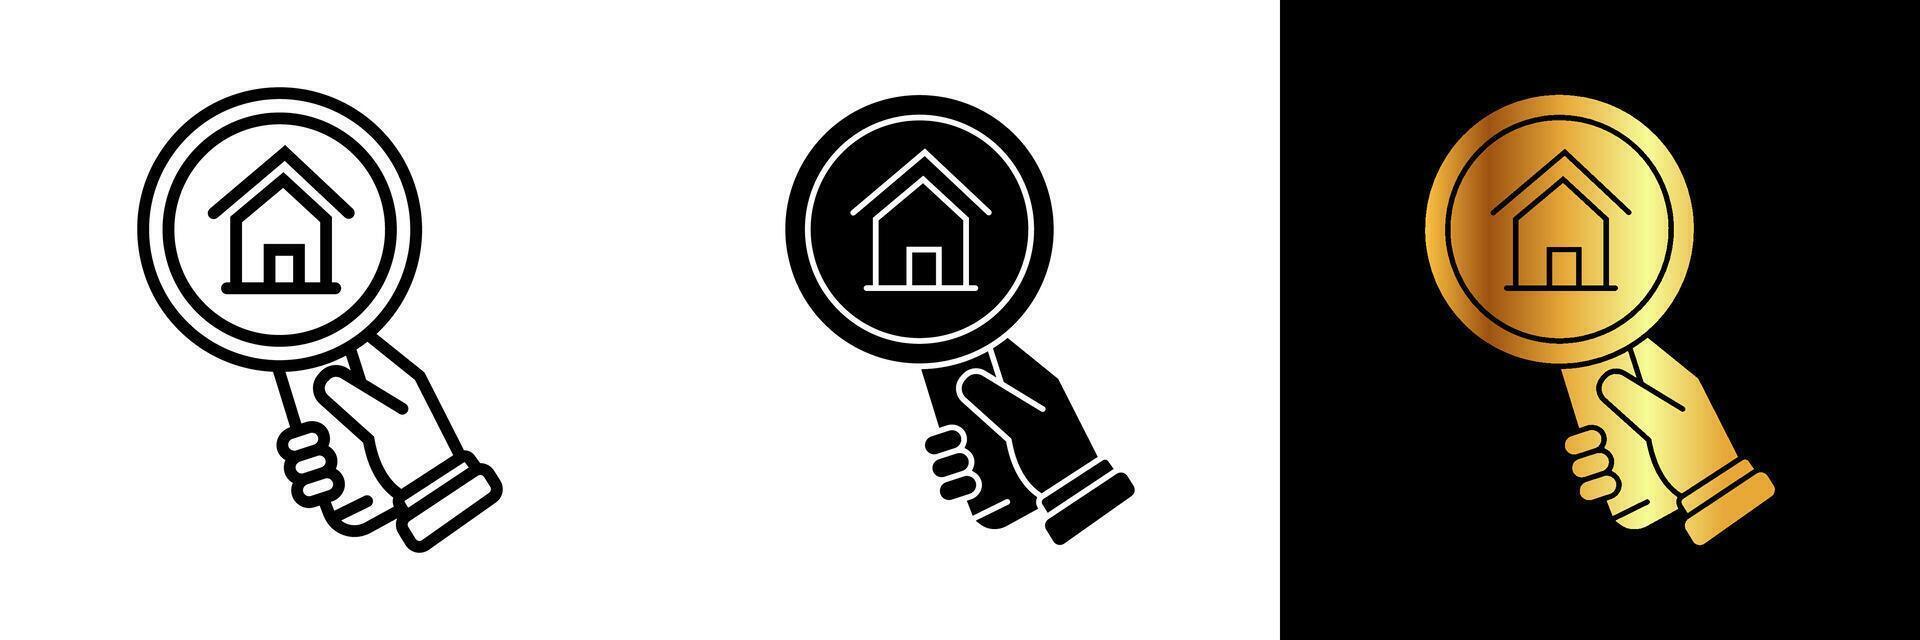 The Magnifying Glass icon embodies the concept of scrutiny, investigation, and focused exploration. vector